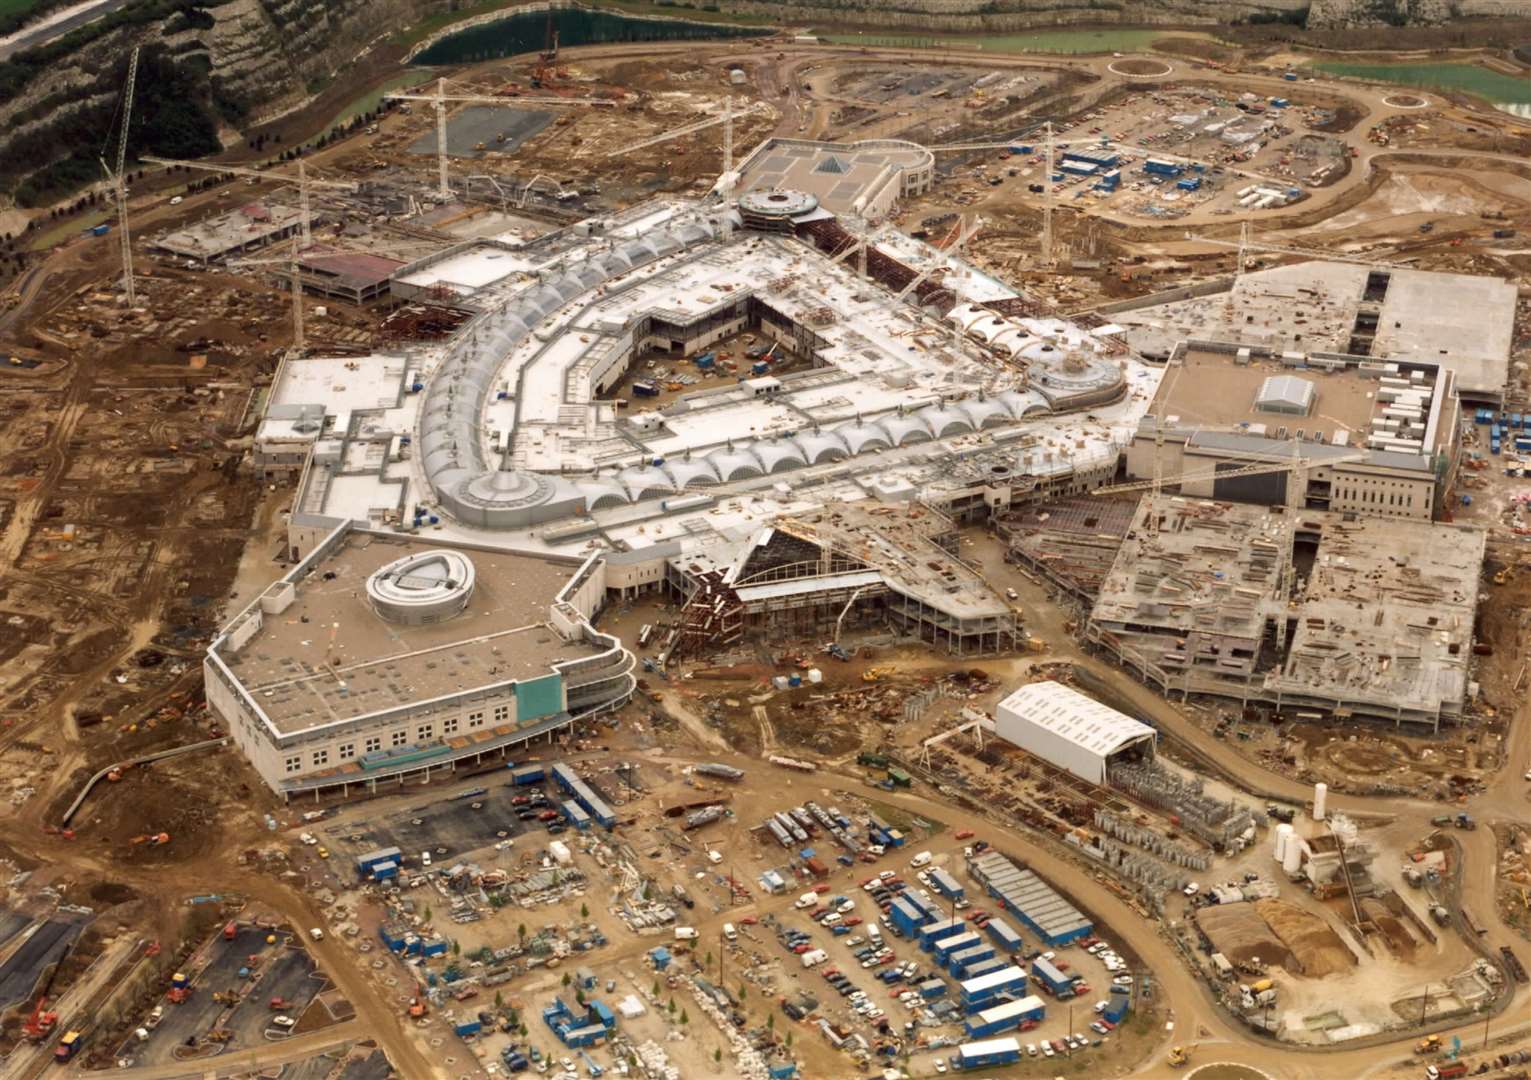 Bluewater taking shape in April 1998. Construction work lasted for three years, with a total of 20,000 people working on the £375 million project.